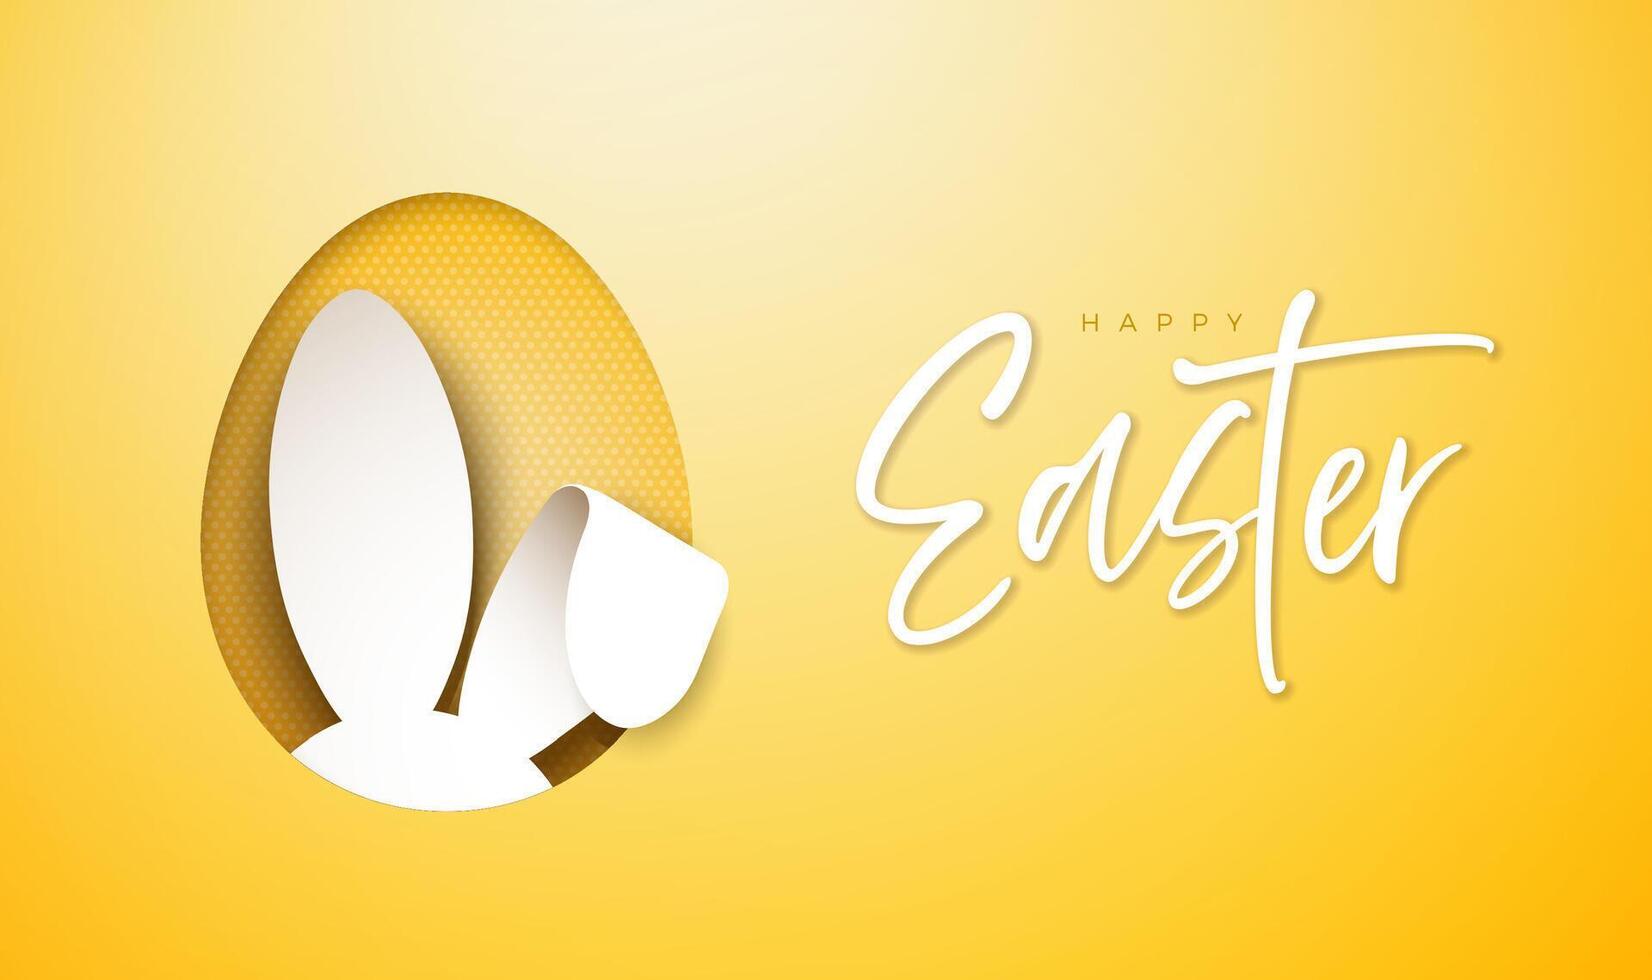 Happy Easter Holiday Illustration with Egg and Rabbit Silhouette on Sun Yellow Background. International Religious Celebration Banner Design with Typography Lettering for Greeting Card or Party vector